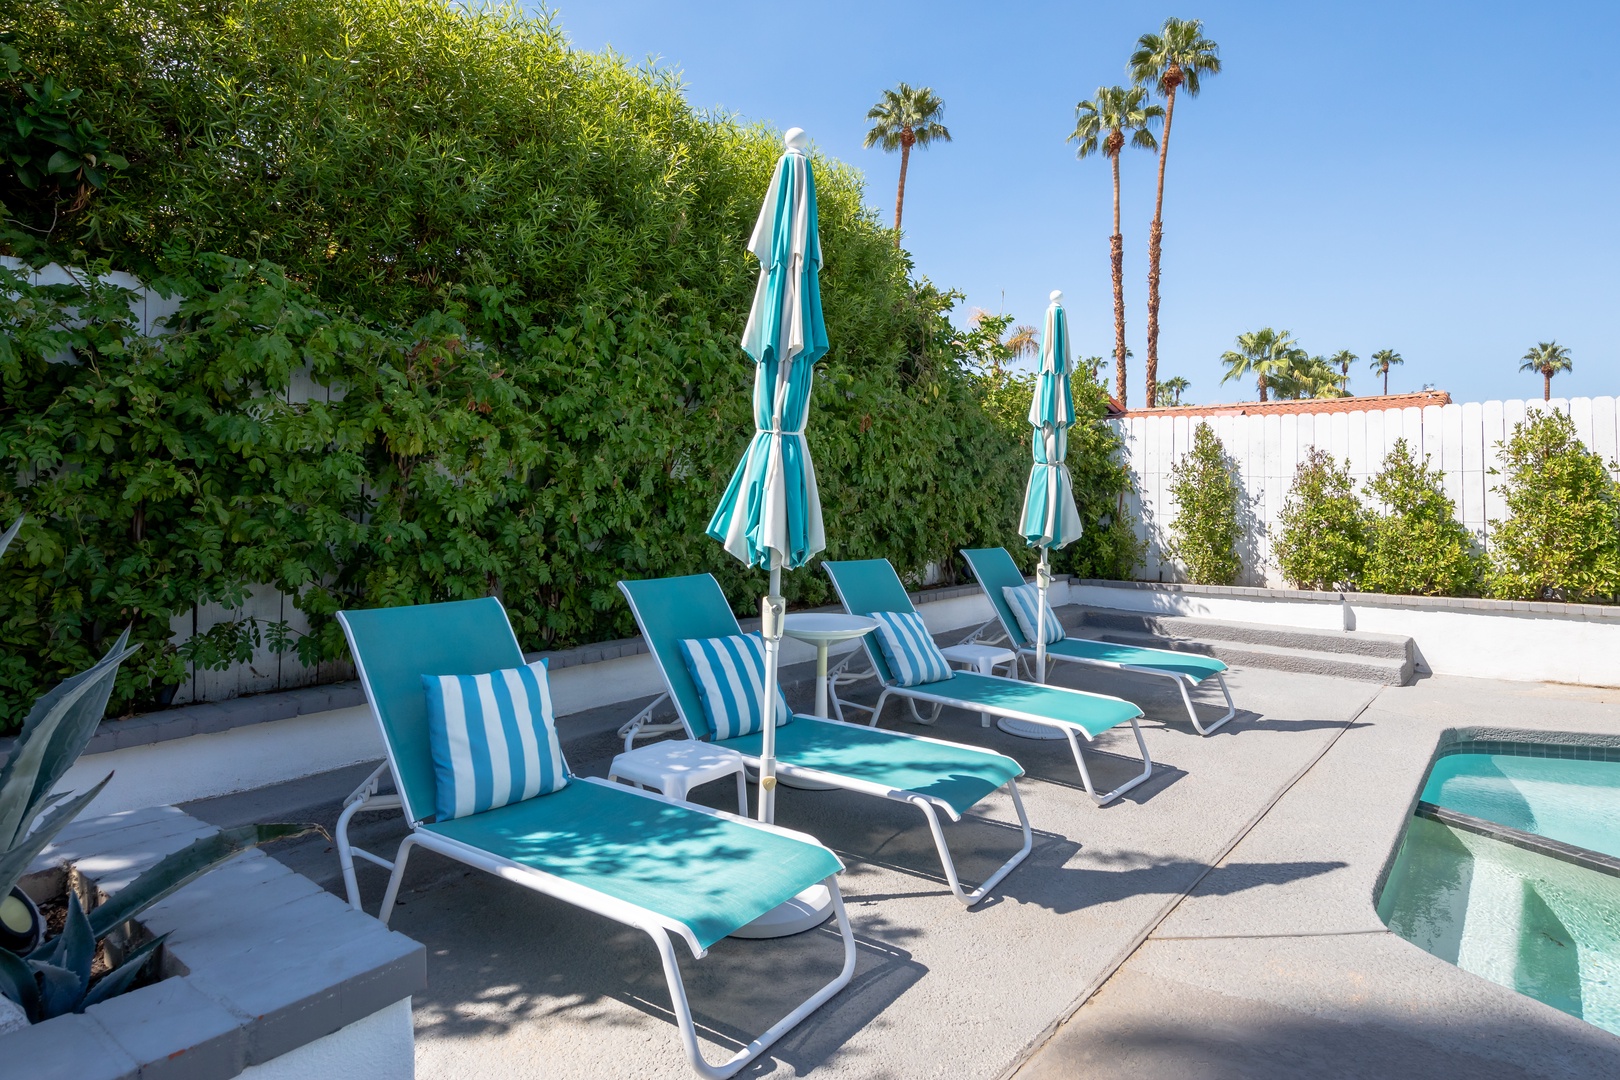 Lounge chairs with umbrellas to keep you poolside